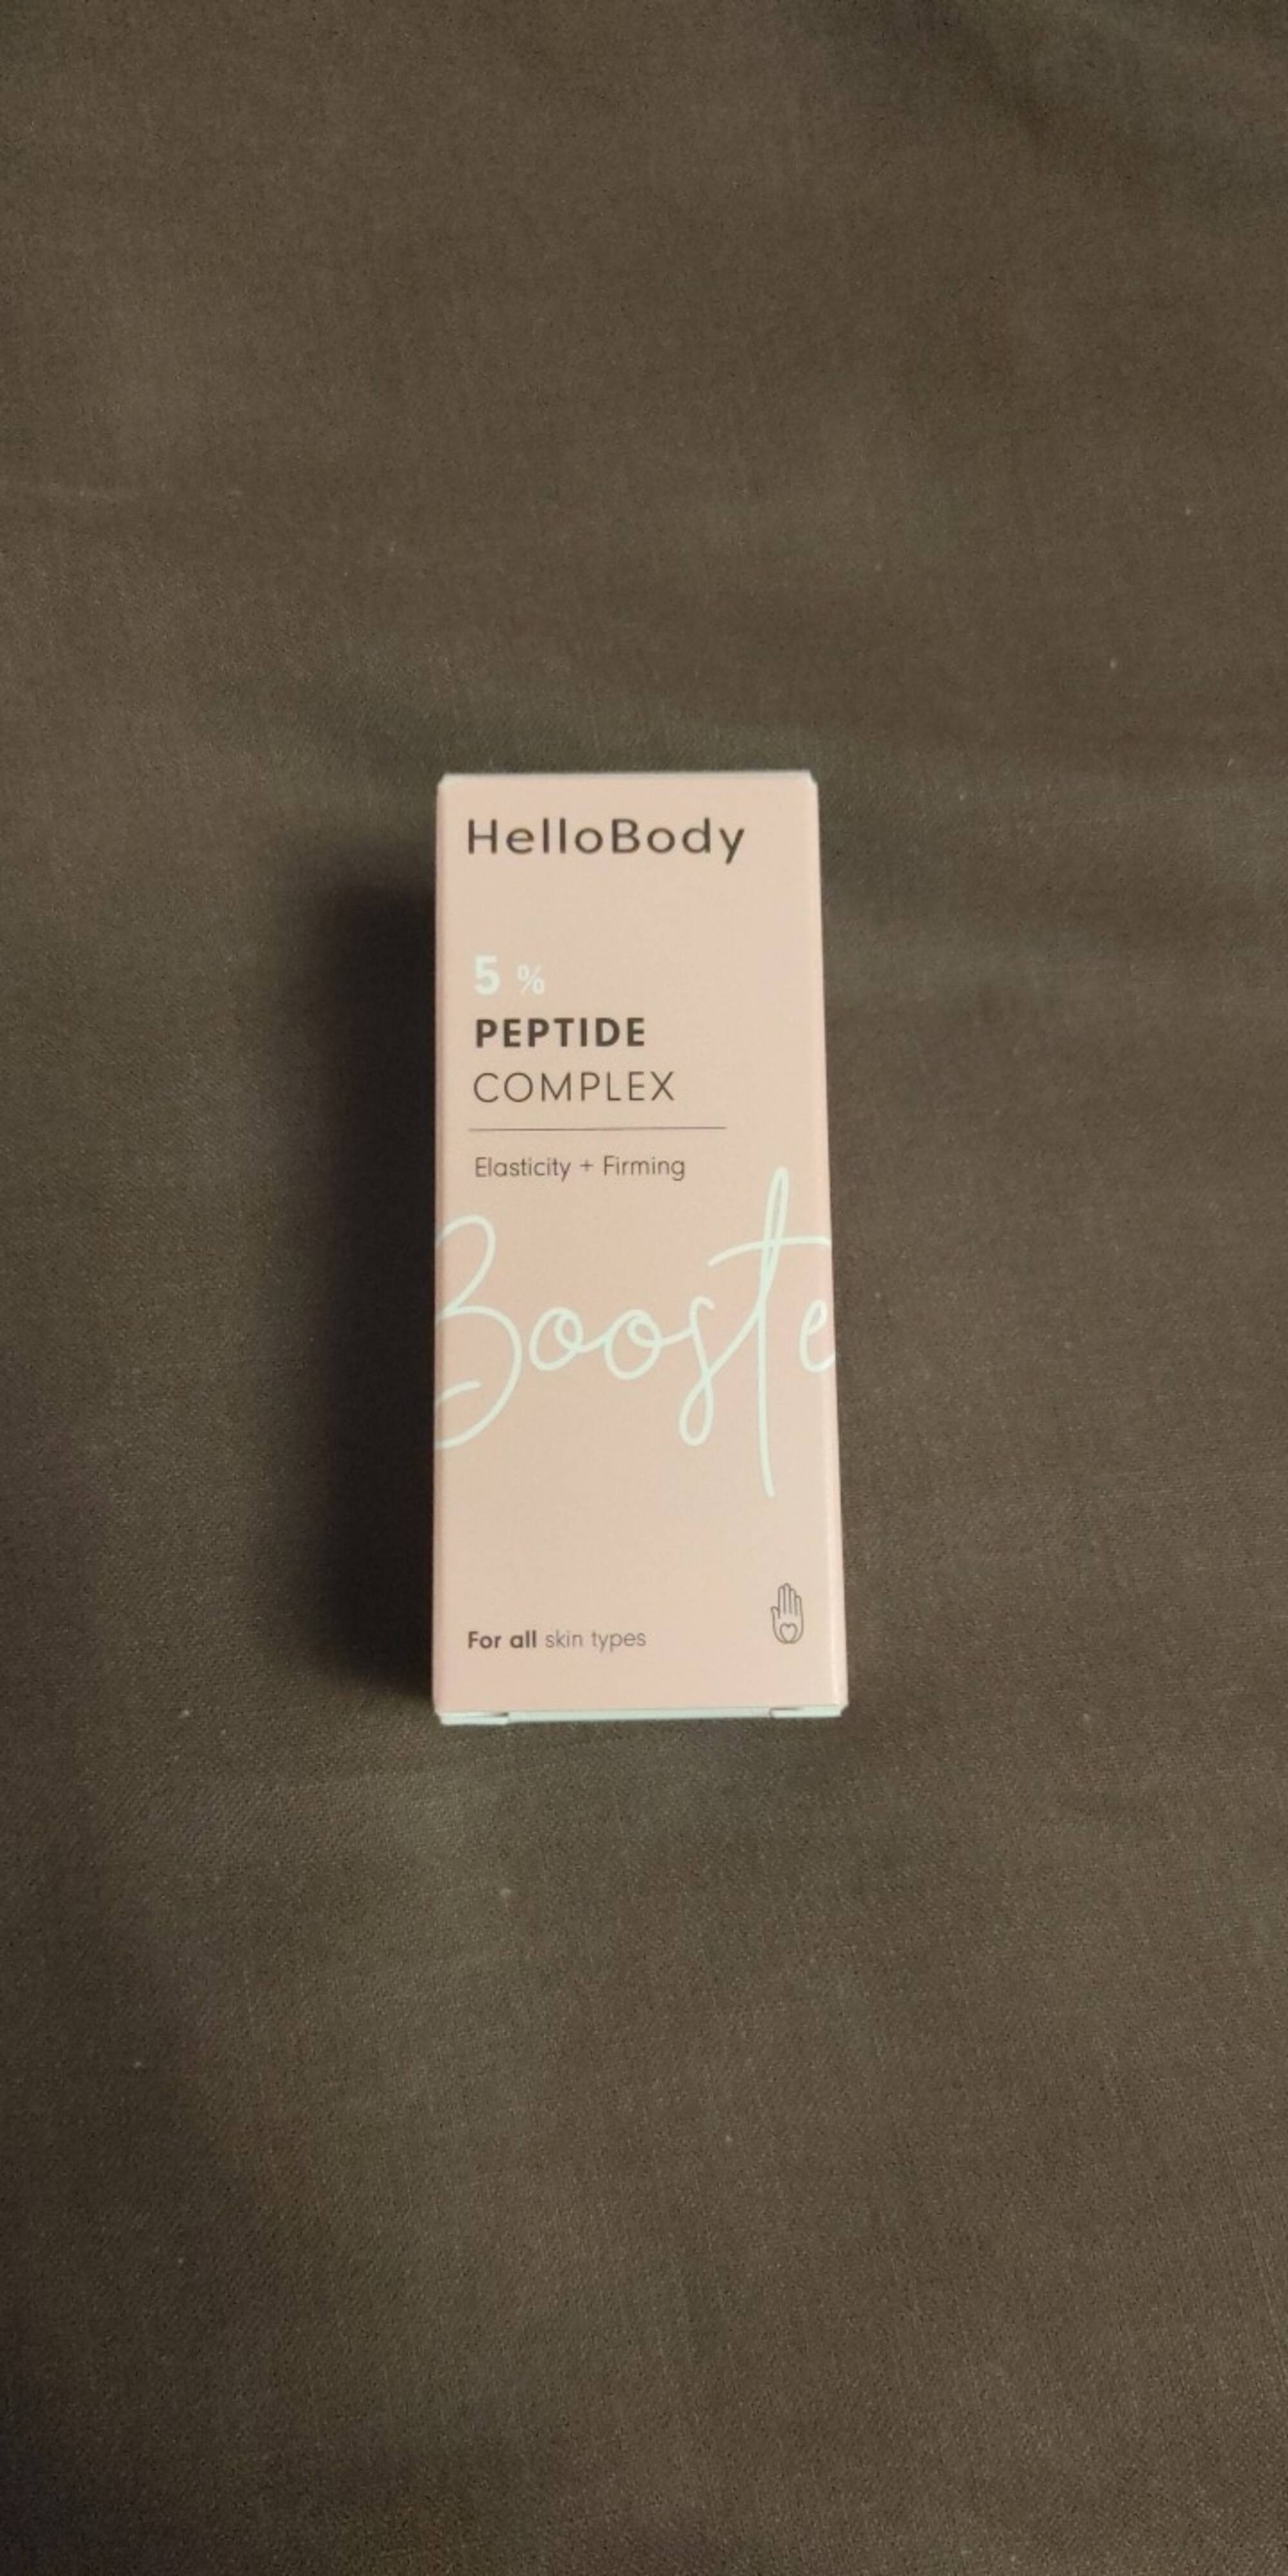 HELLOBODY - 5% peptide complex - Booster elasticity + firming